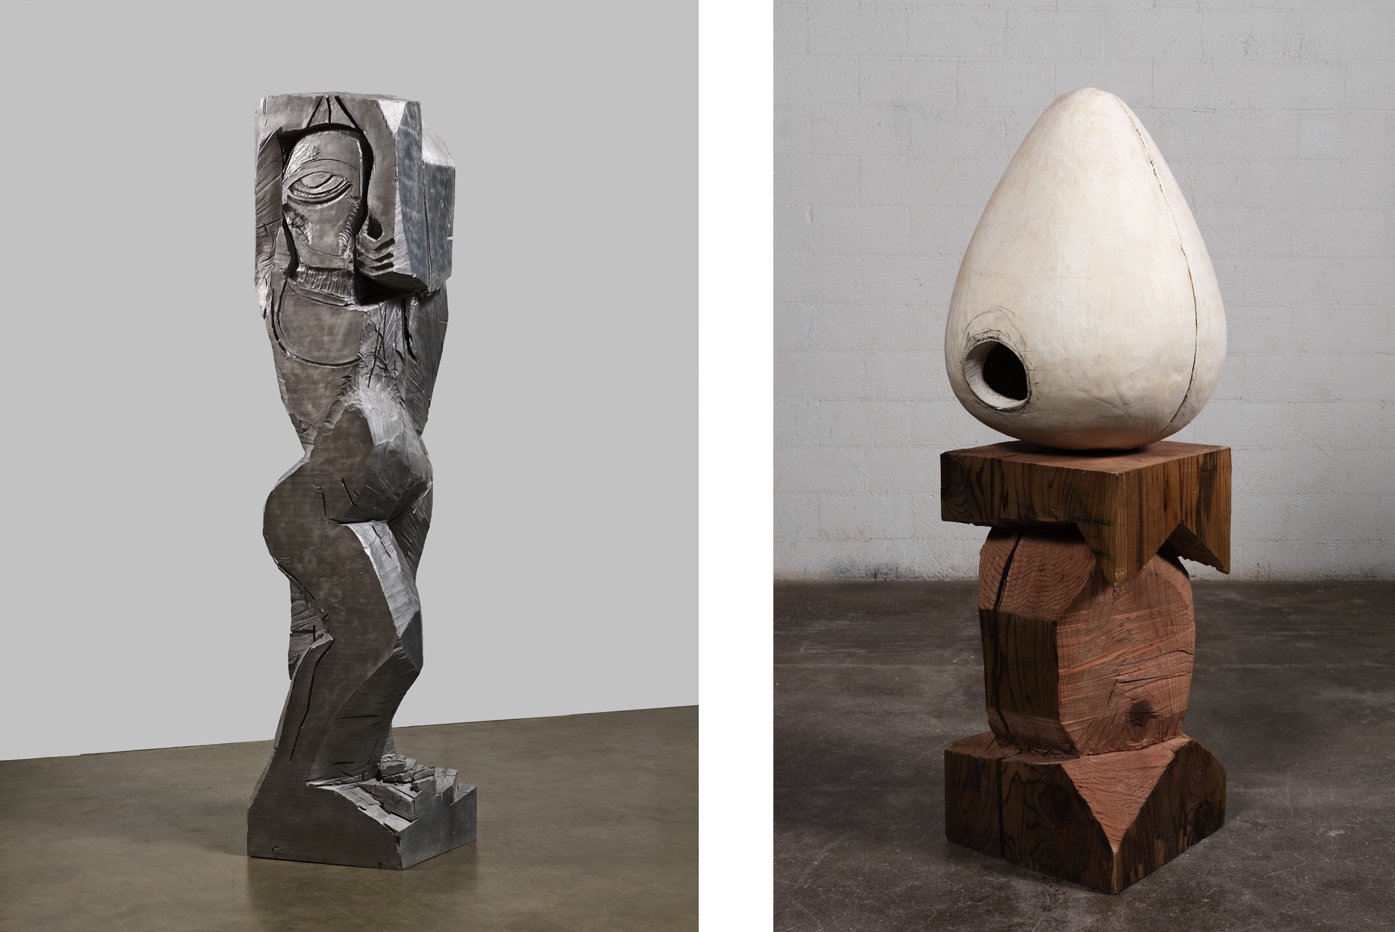 Left: Thomas Houseago, 'Rattlesnake Figure (Aluminum),' 2011. Photography by Fredrik Nilsen. Courtesy of the artist and Hauser & Wirth.Right: Thomas Houseago, 'Untitled (Egg),' 2015. Photography by Fredrik Nilsen. Courtesy of the artist and Hauser & Wirth.